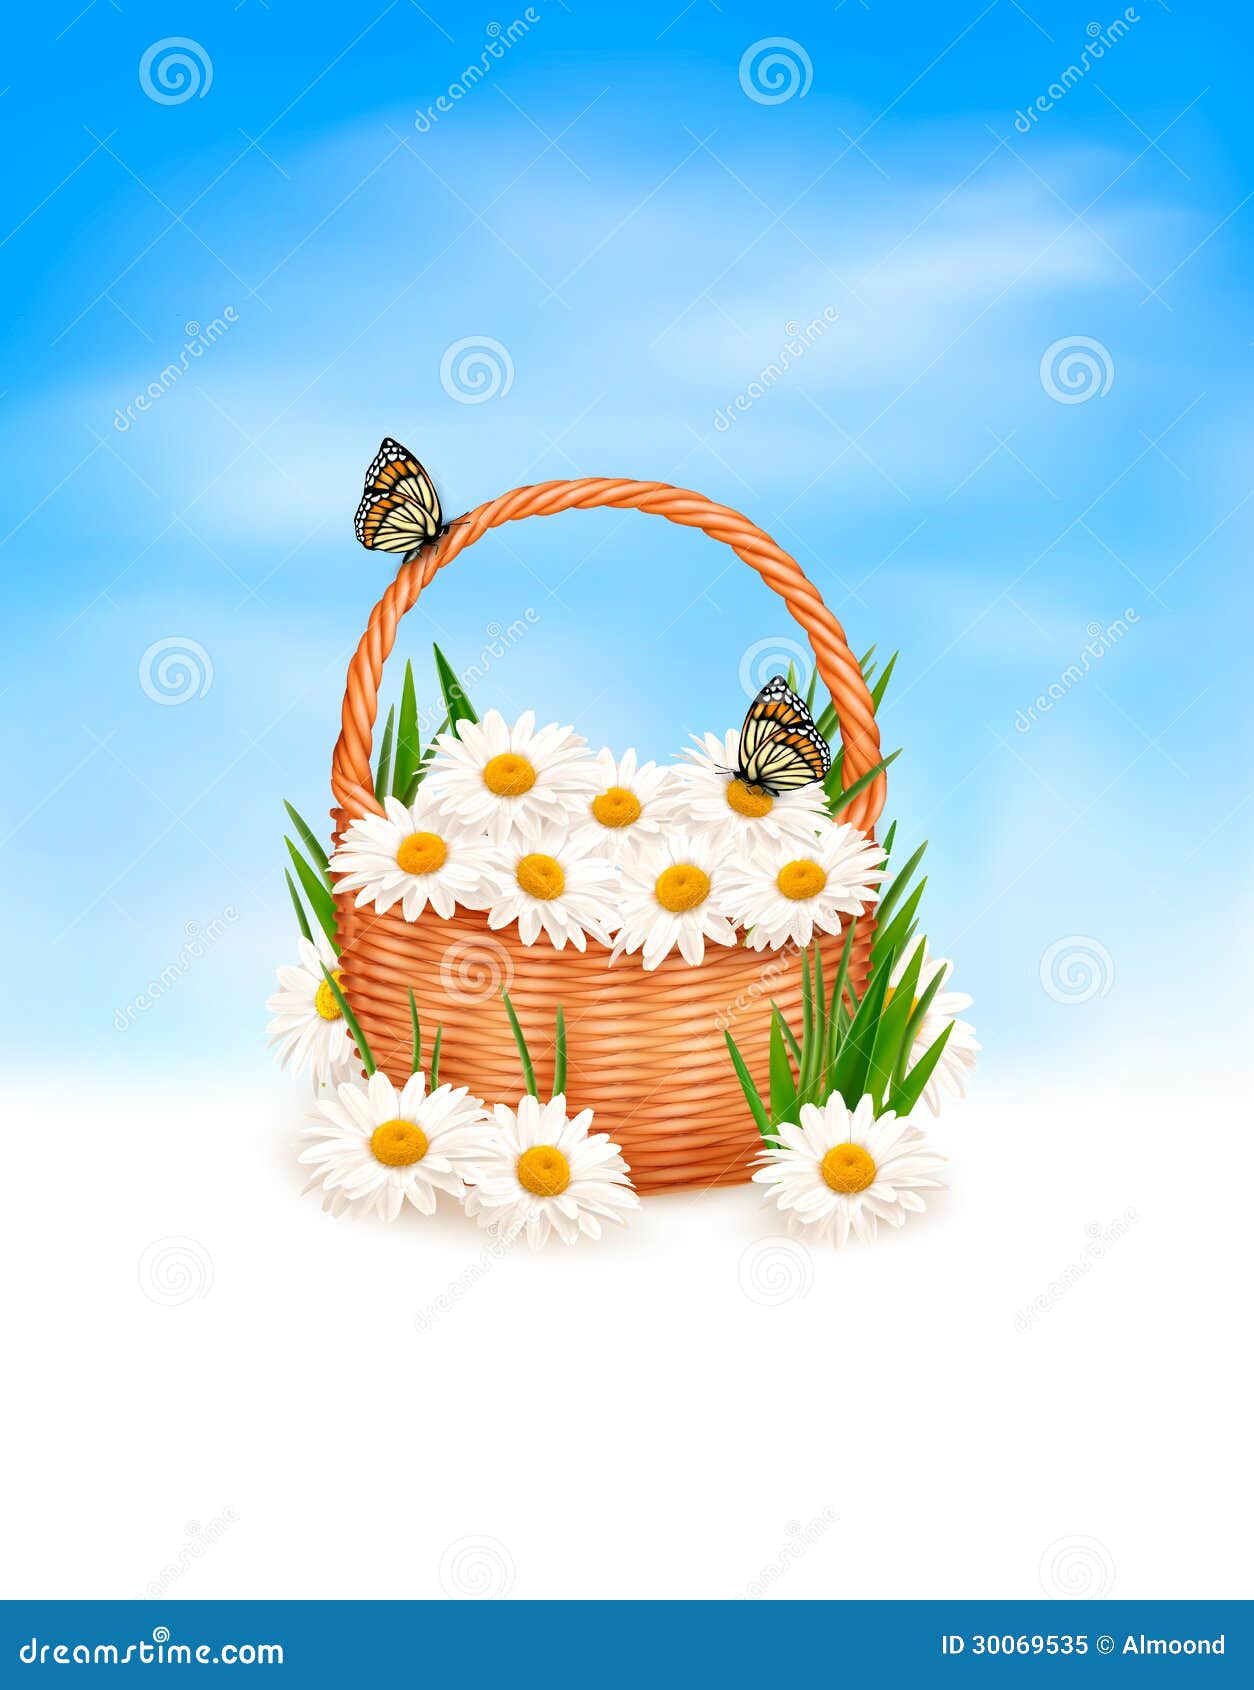 natire background with summer flowers in basket